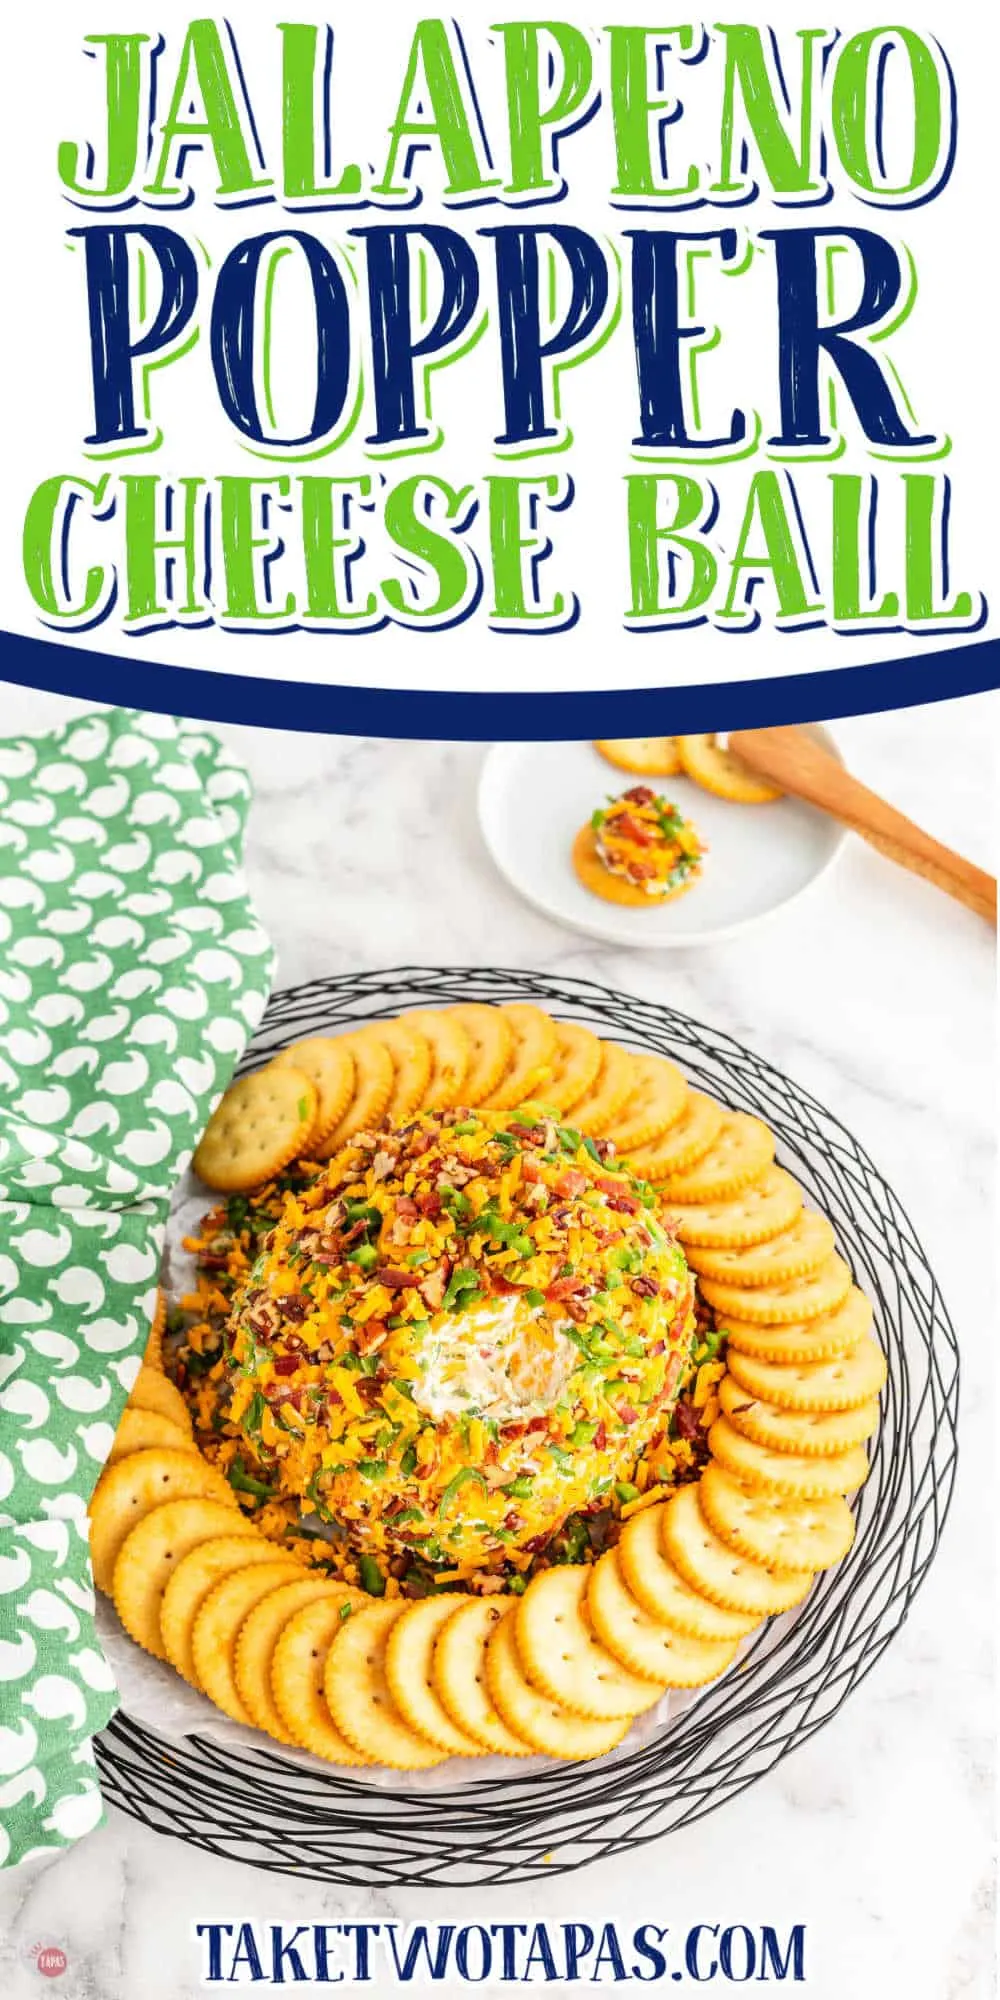 cheese ball with text "jalapeno popper cheese ball"